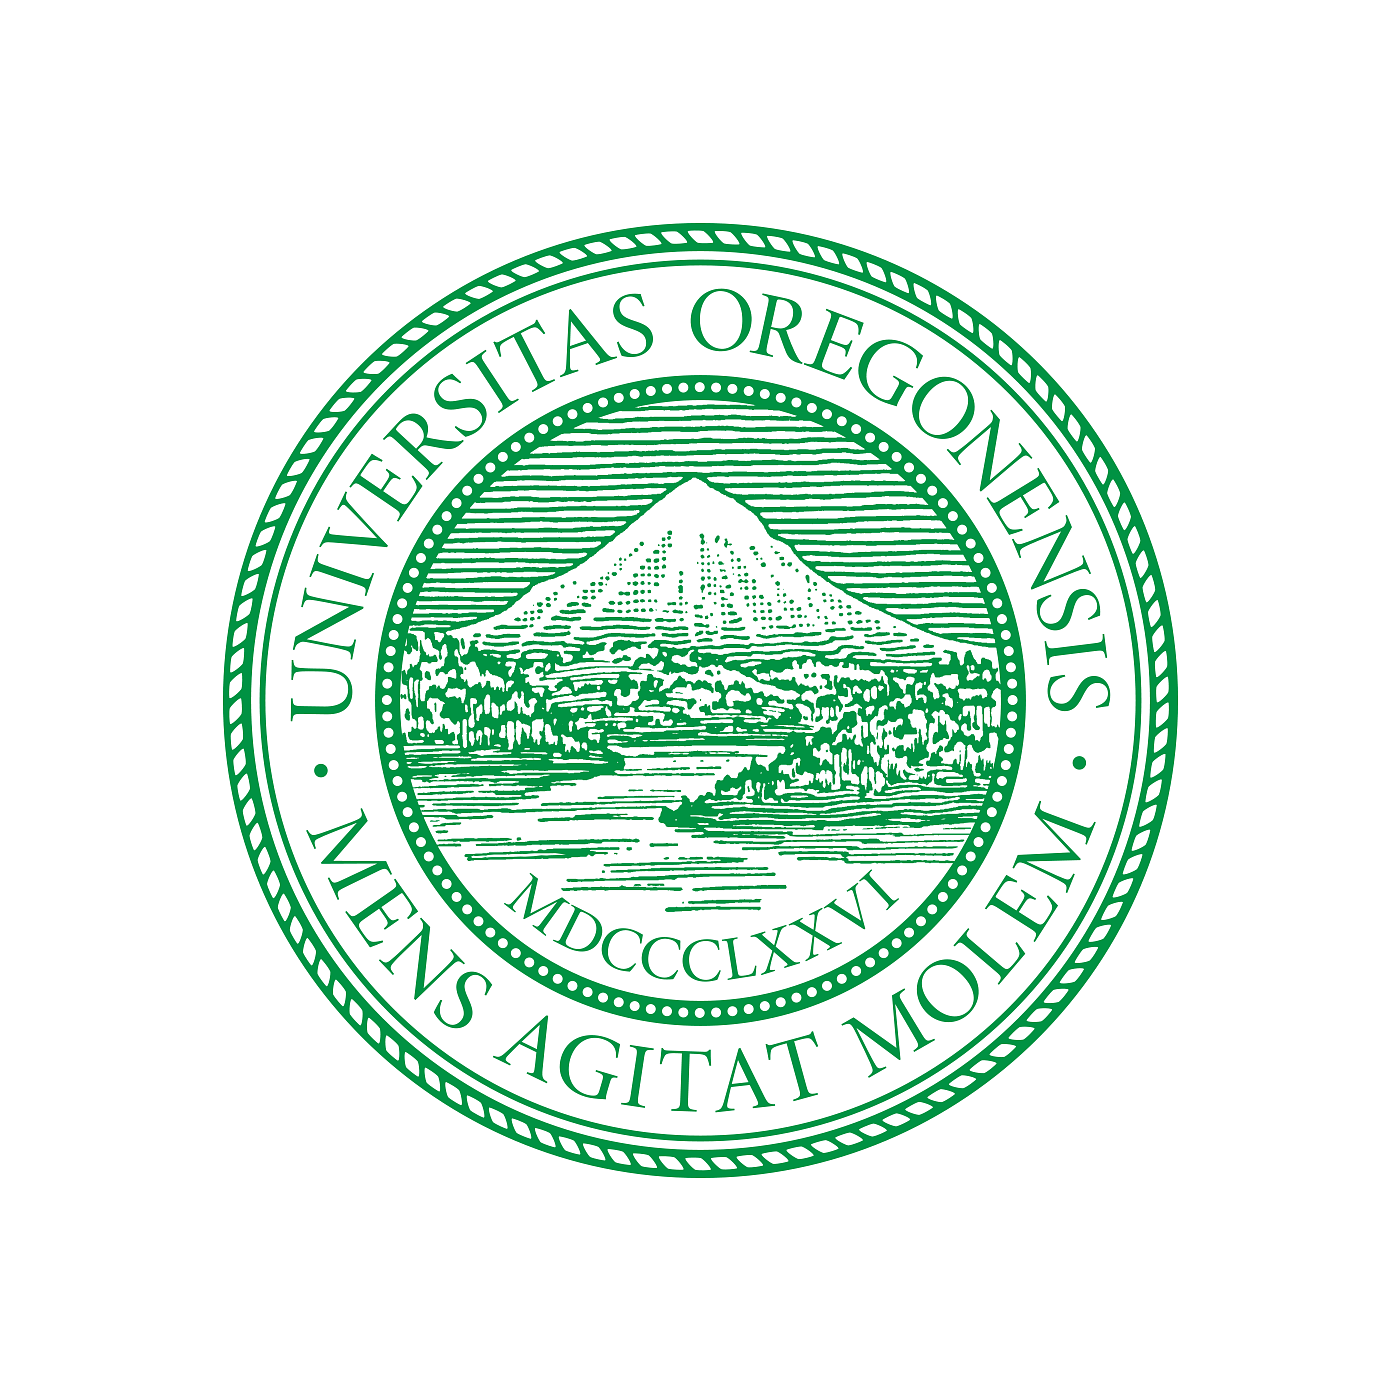 uo great seal